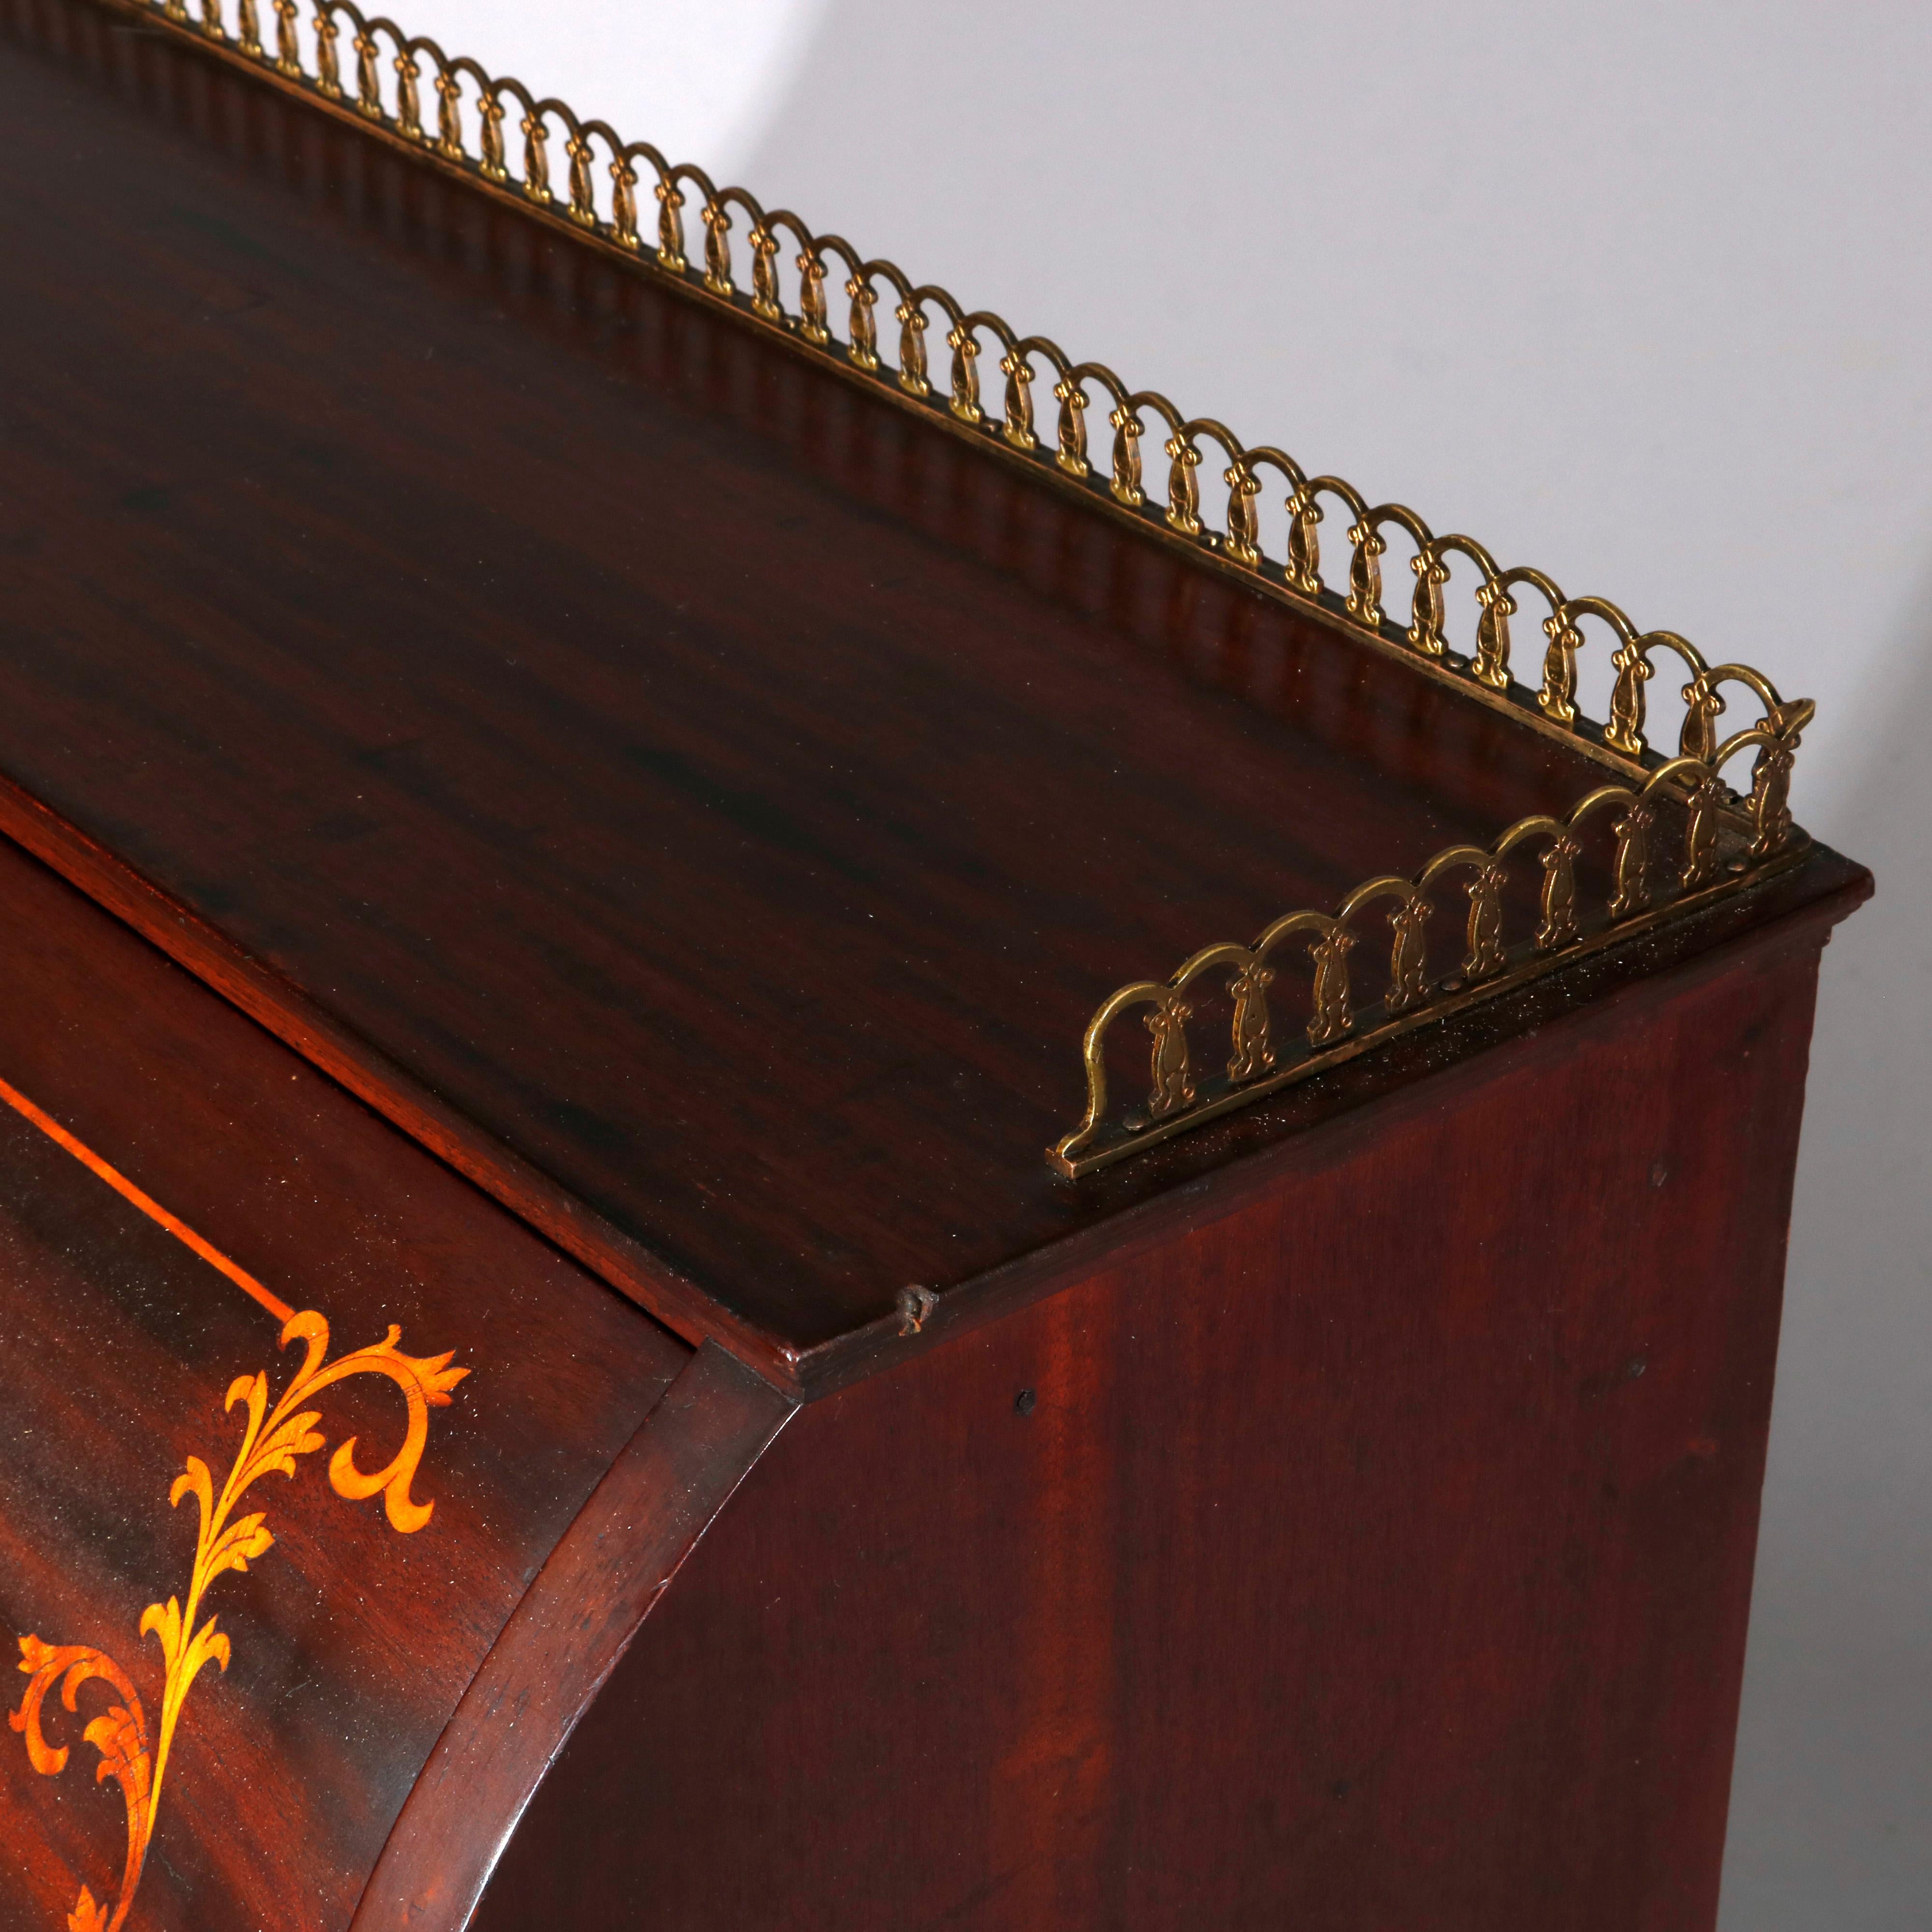 Brass French RJ Horner Style Mahogany and Satinwood Inlaid Drop Front Desk, circa 1900